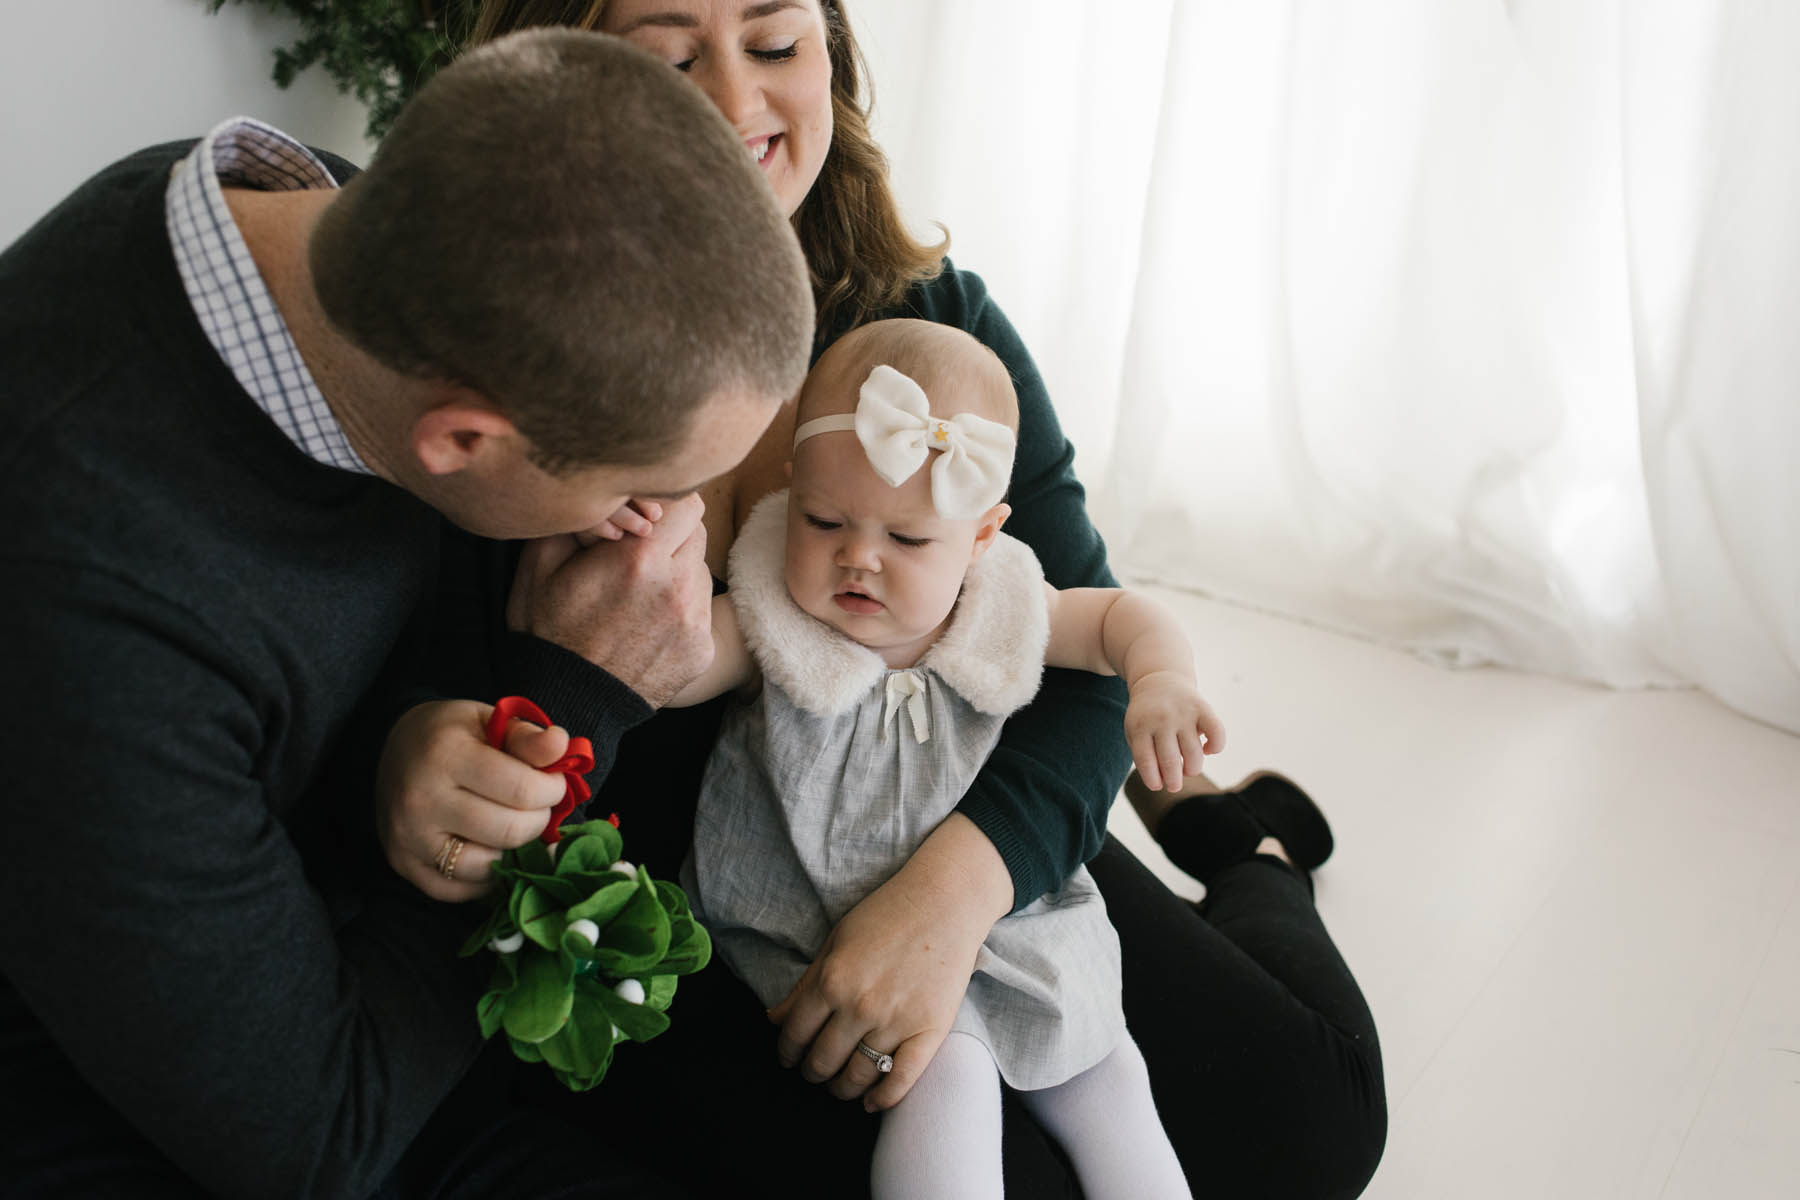 Christmas card photo ideas, Photo by Elle Baker Photography, baby girl being kissed by her parents under mistletoe